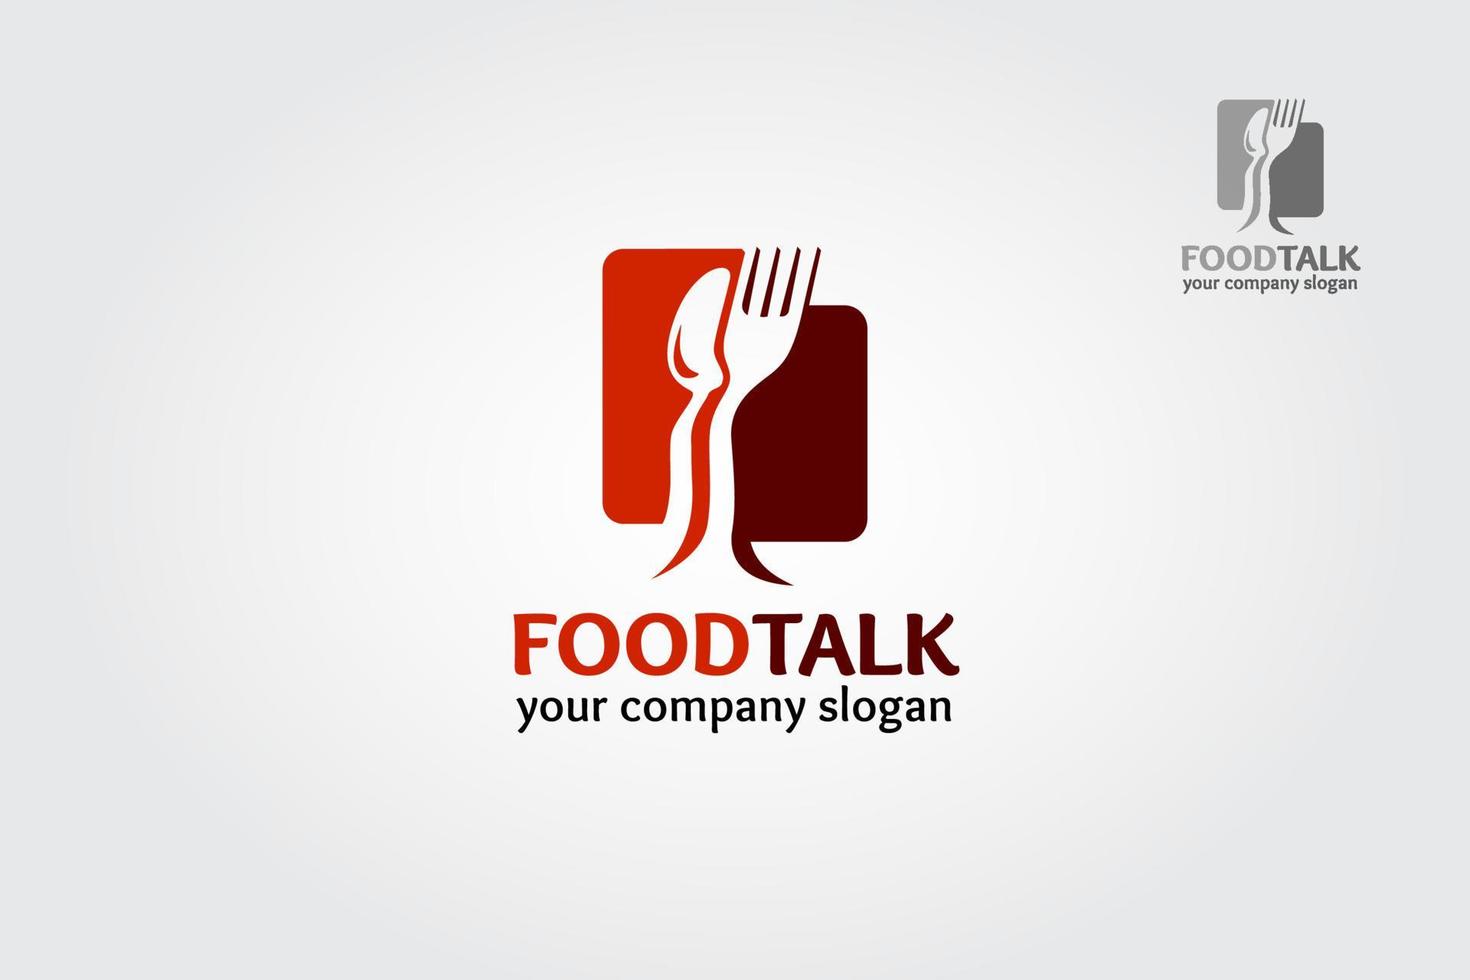 FoodTalk Logo is created for your cafe, product label, food resto, restaurant, and many more. They are fully editable and scalable without losing resolution. vector